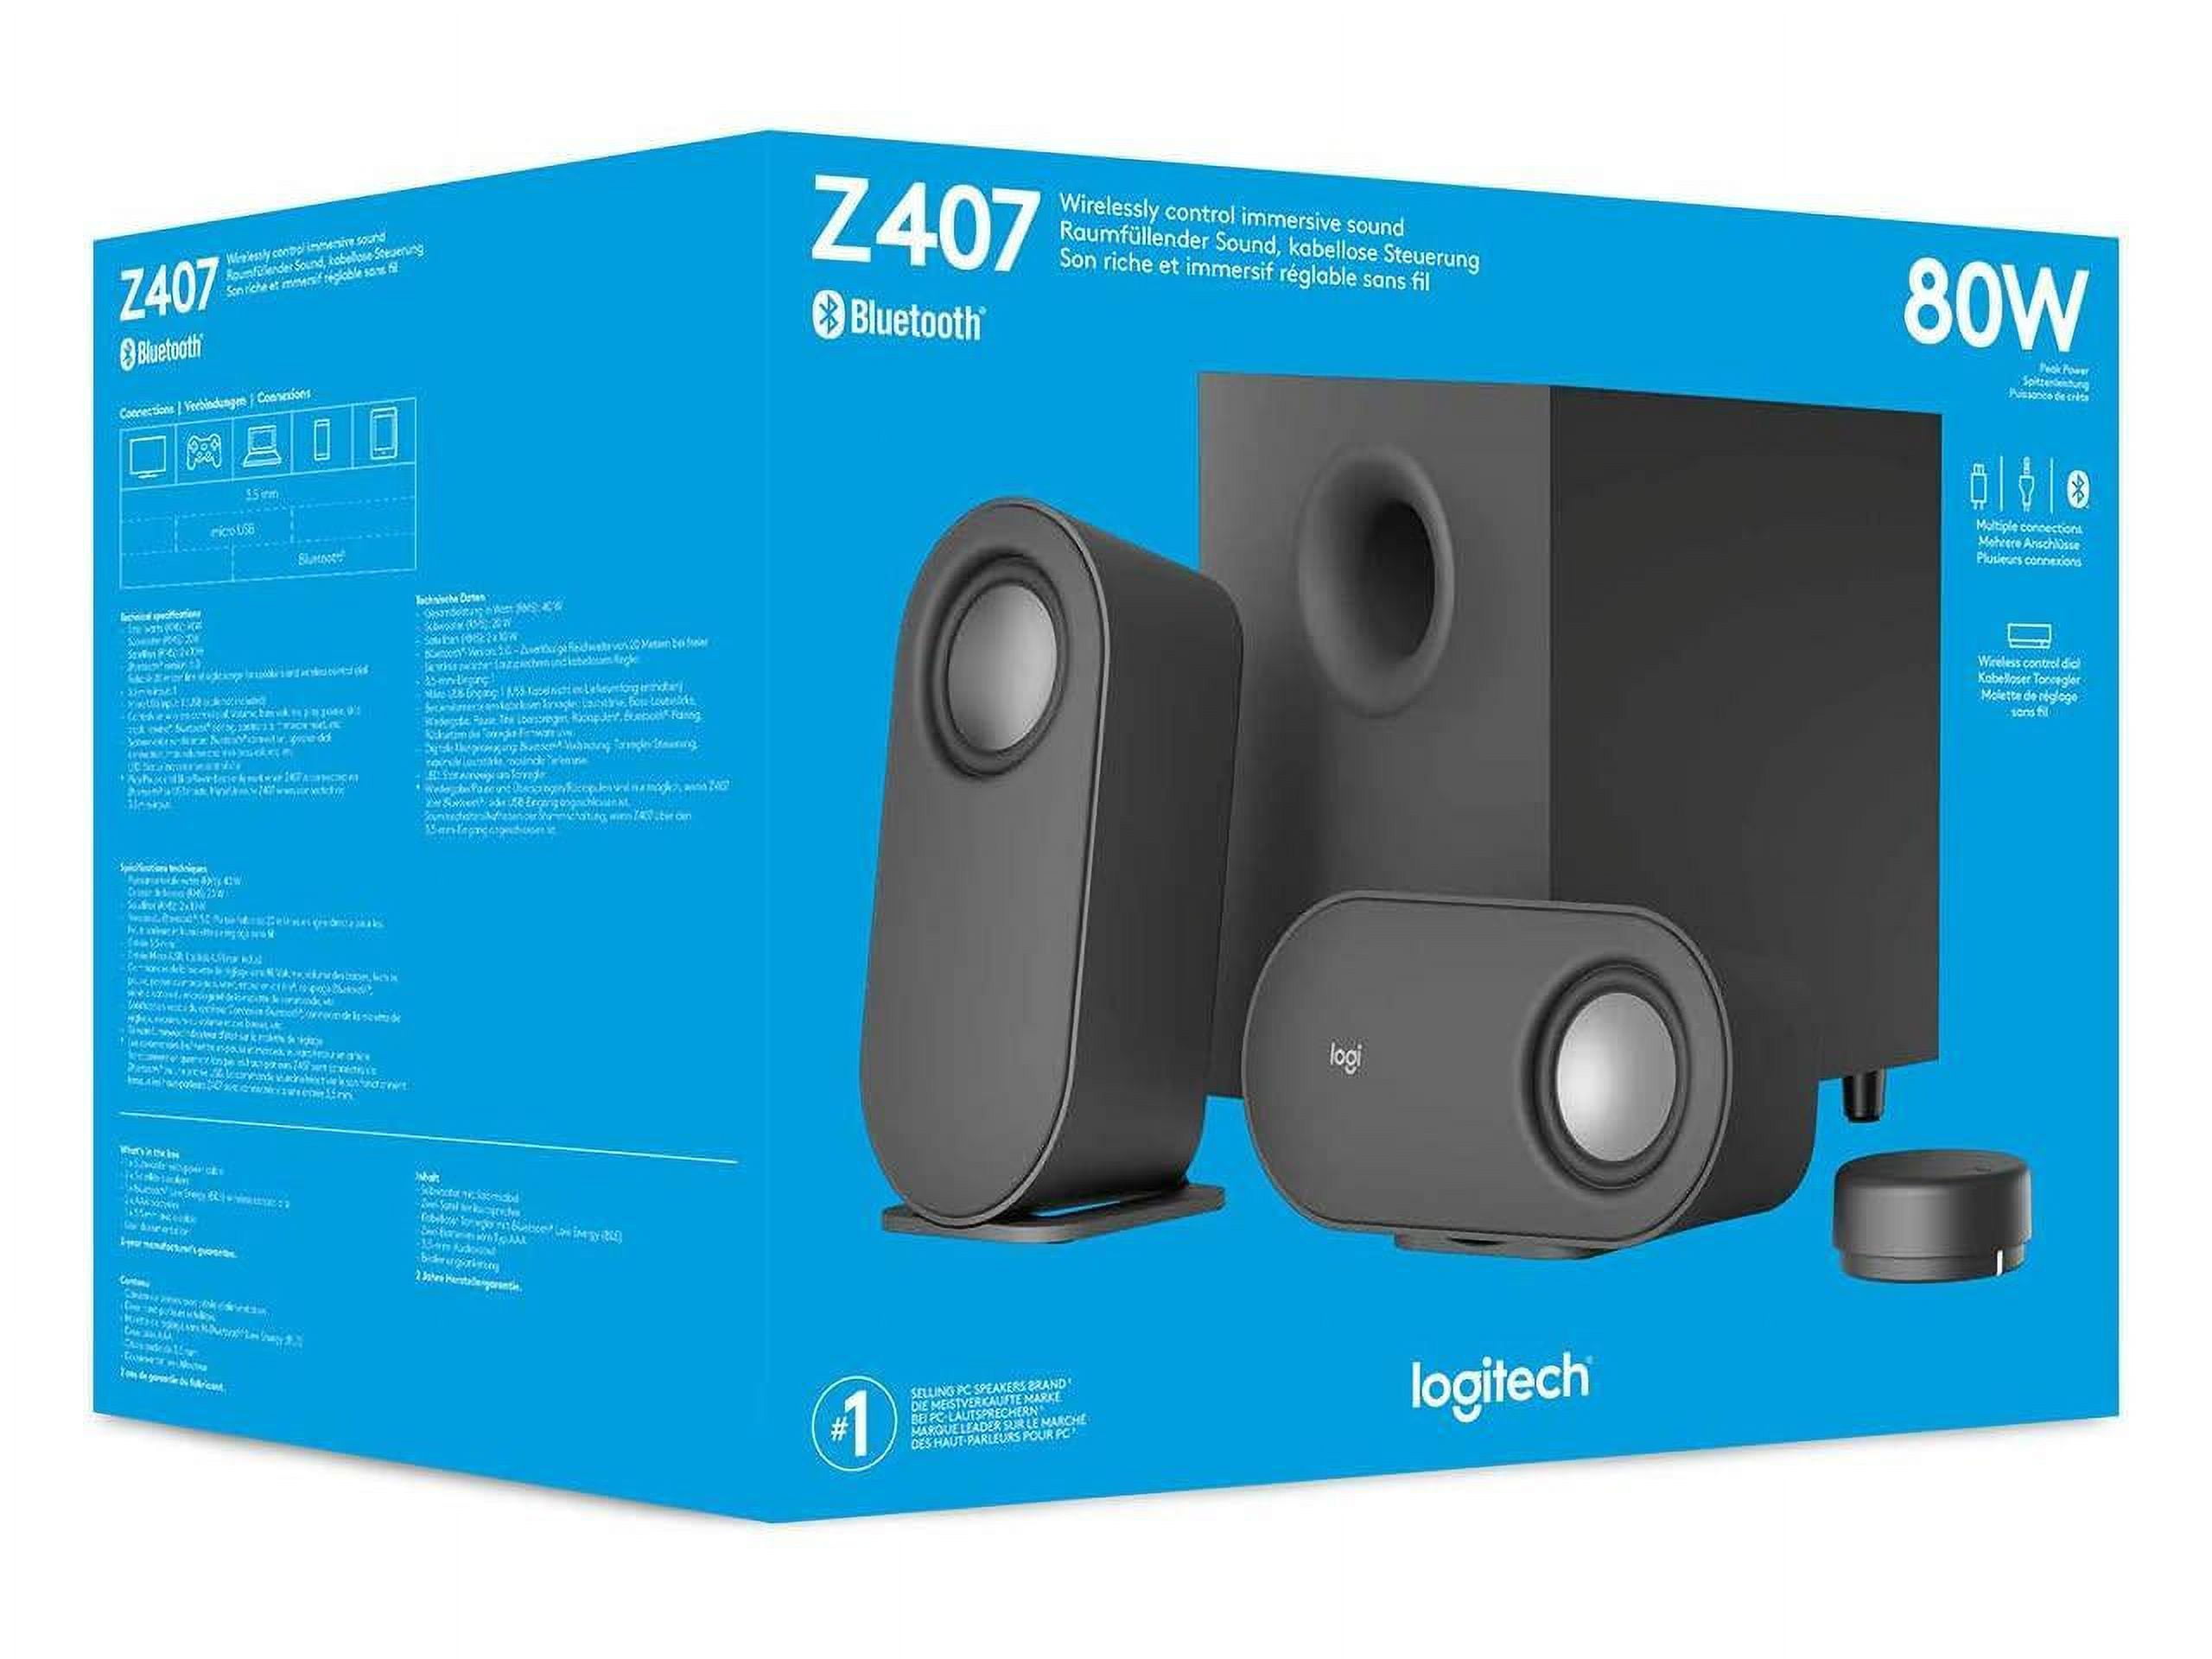 Logitech Z407 Bluetooth Speakers with Subwoofer and Wireless Immersive Sound, Premium Audio with Multiple Inputs, Speakers - Walmart.com